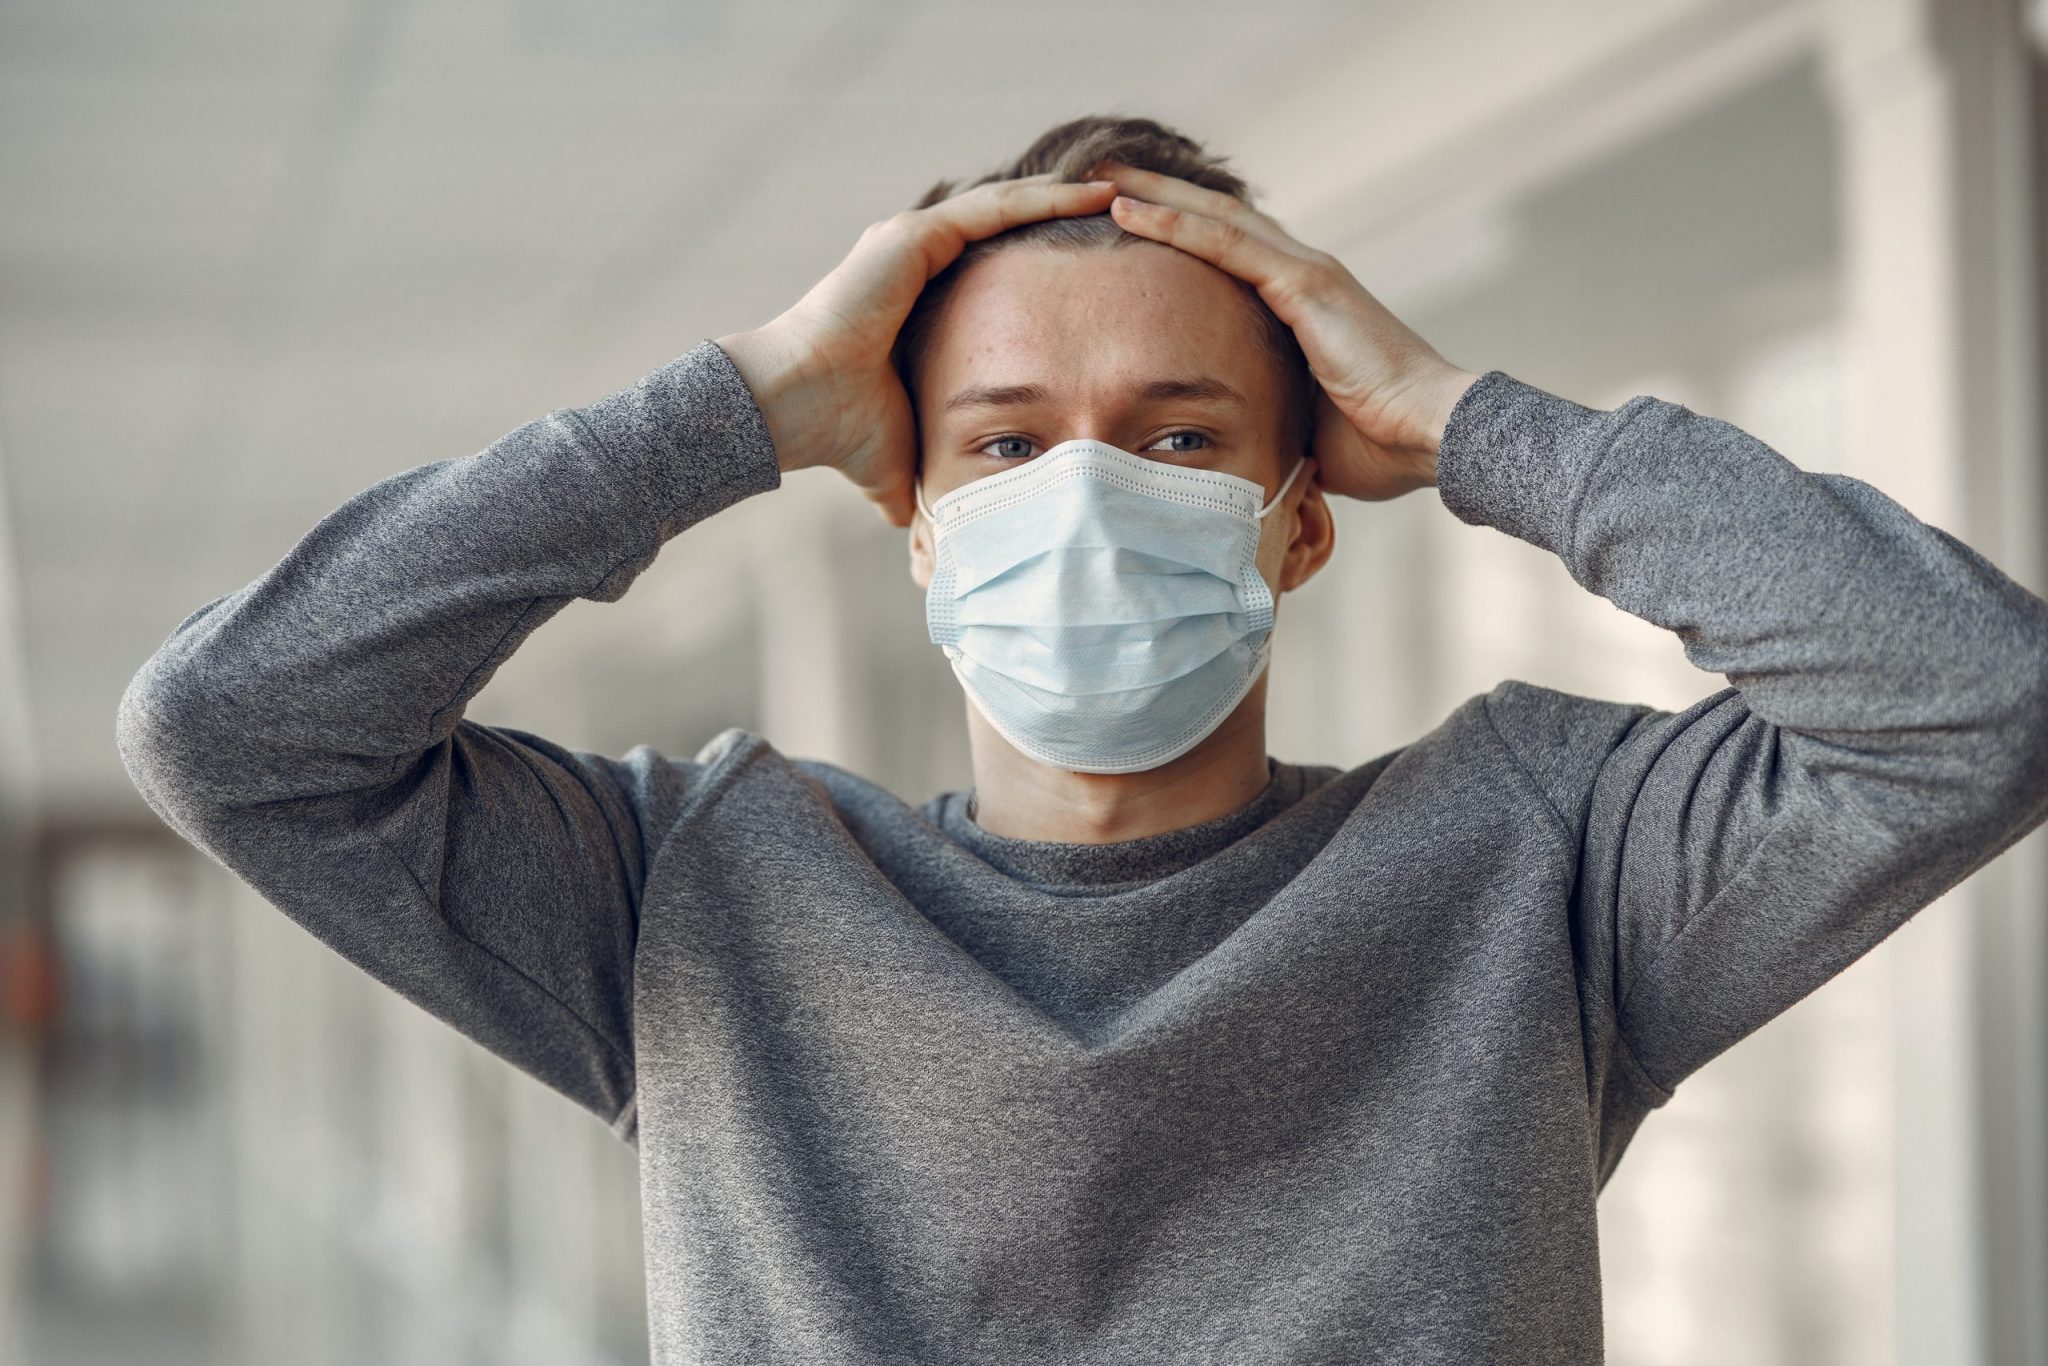 Young man wearing surgical mask, hands on head in a frustrated manner because he is coping with coronavirus stress.